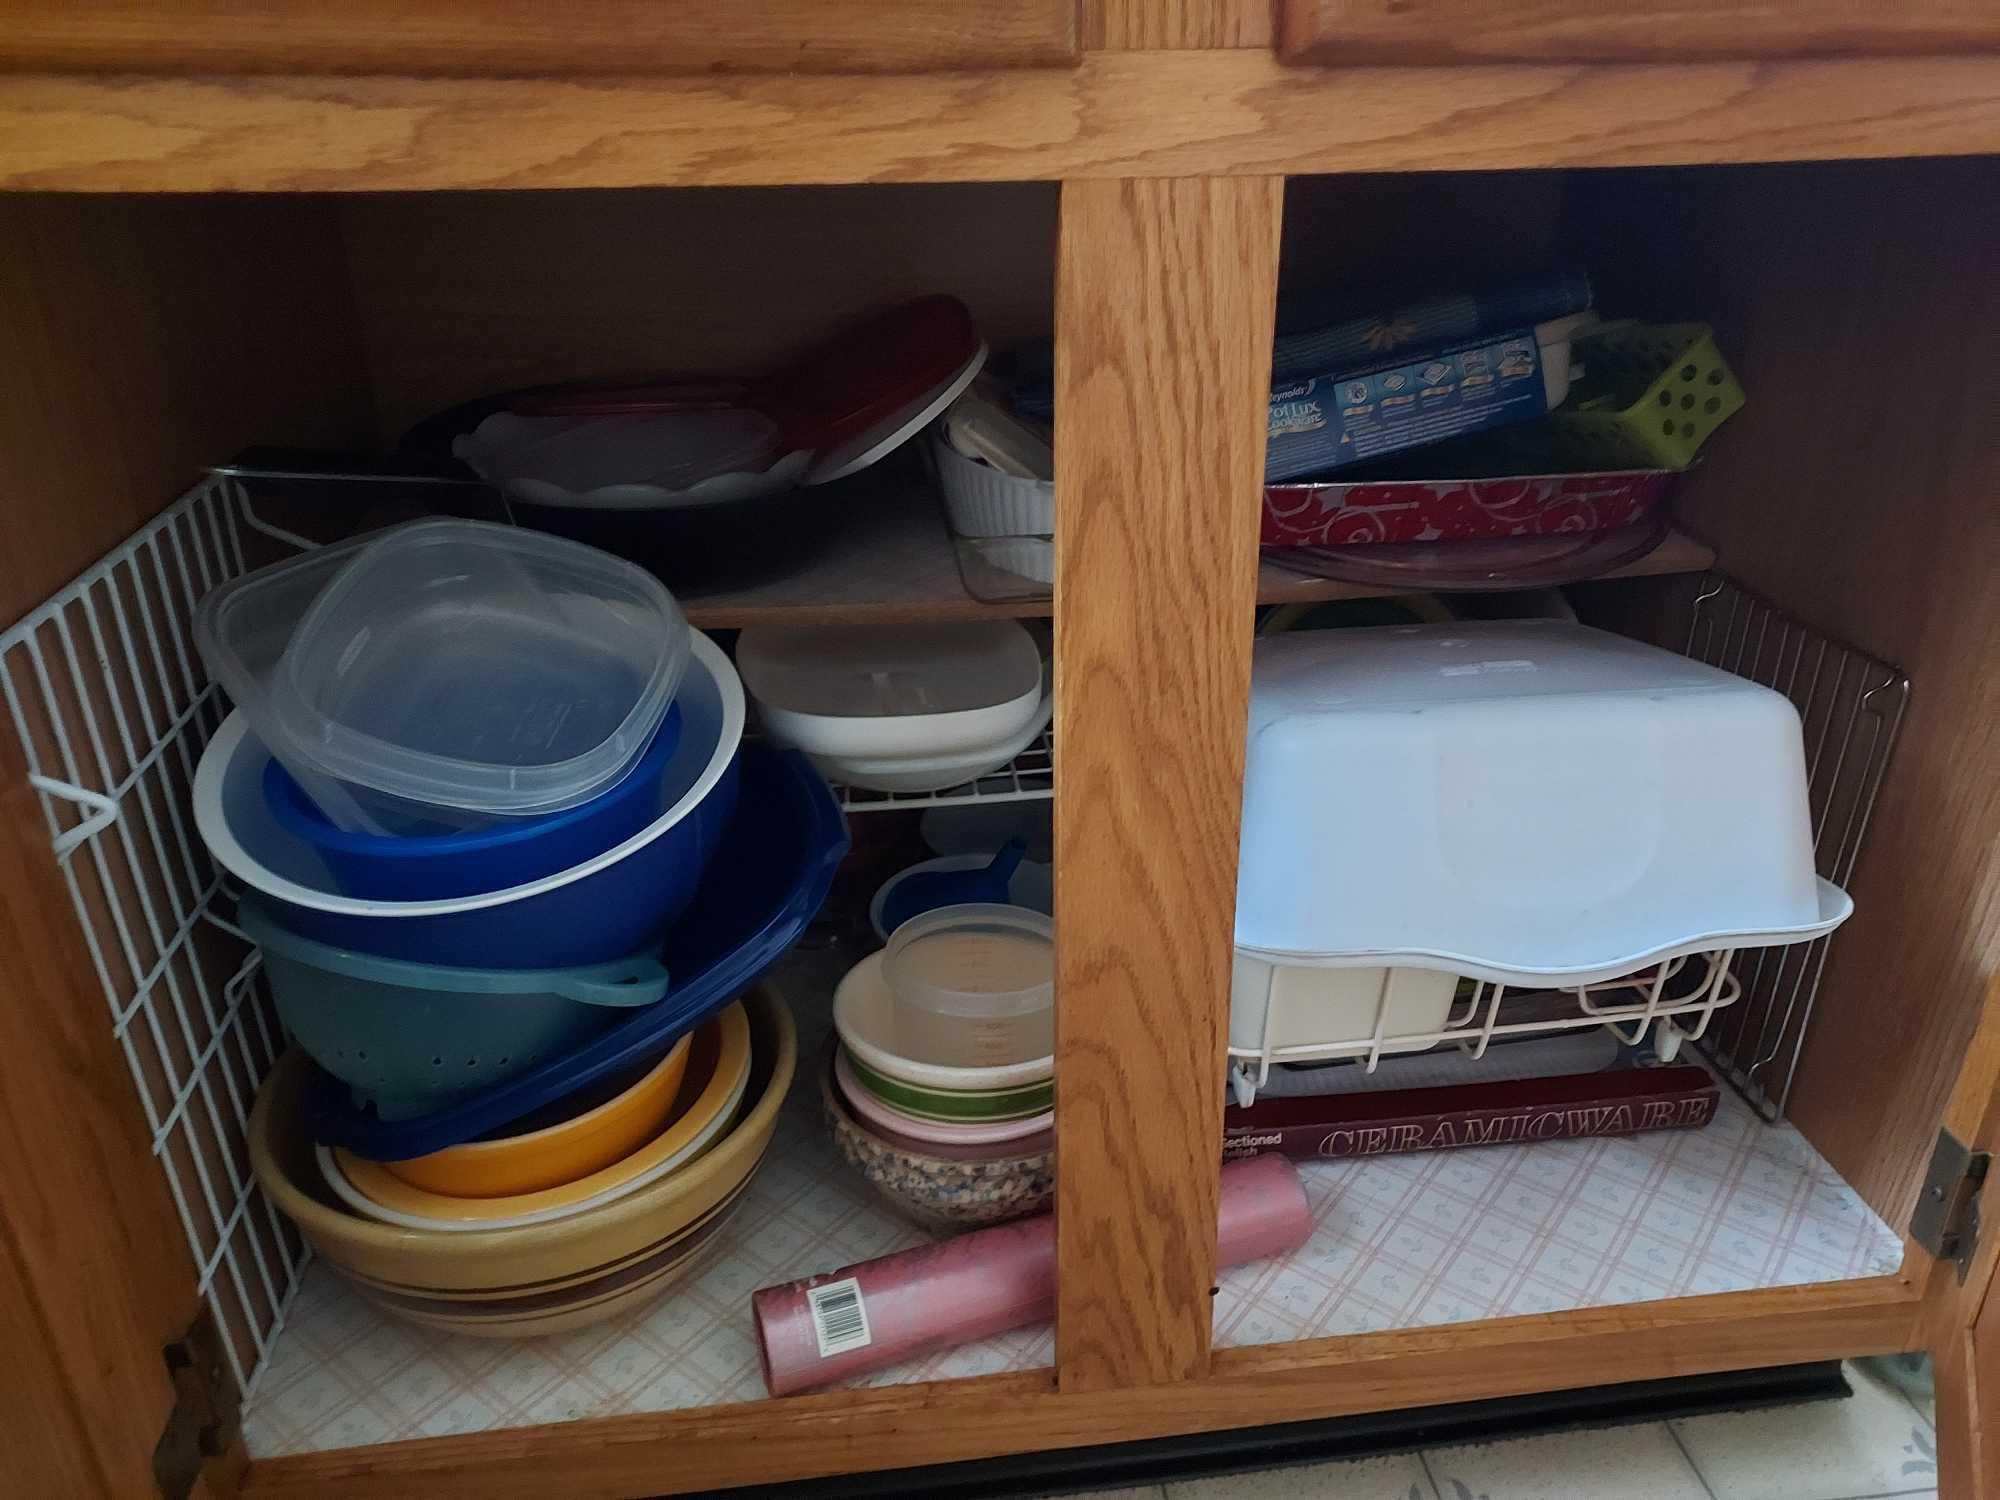 Contents of Kitchen Cabinets & Countertops - Cookware, Kitchenware, Small Decor, & a Toaster